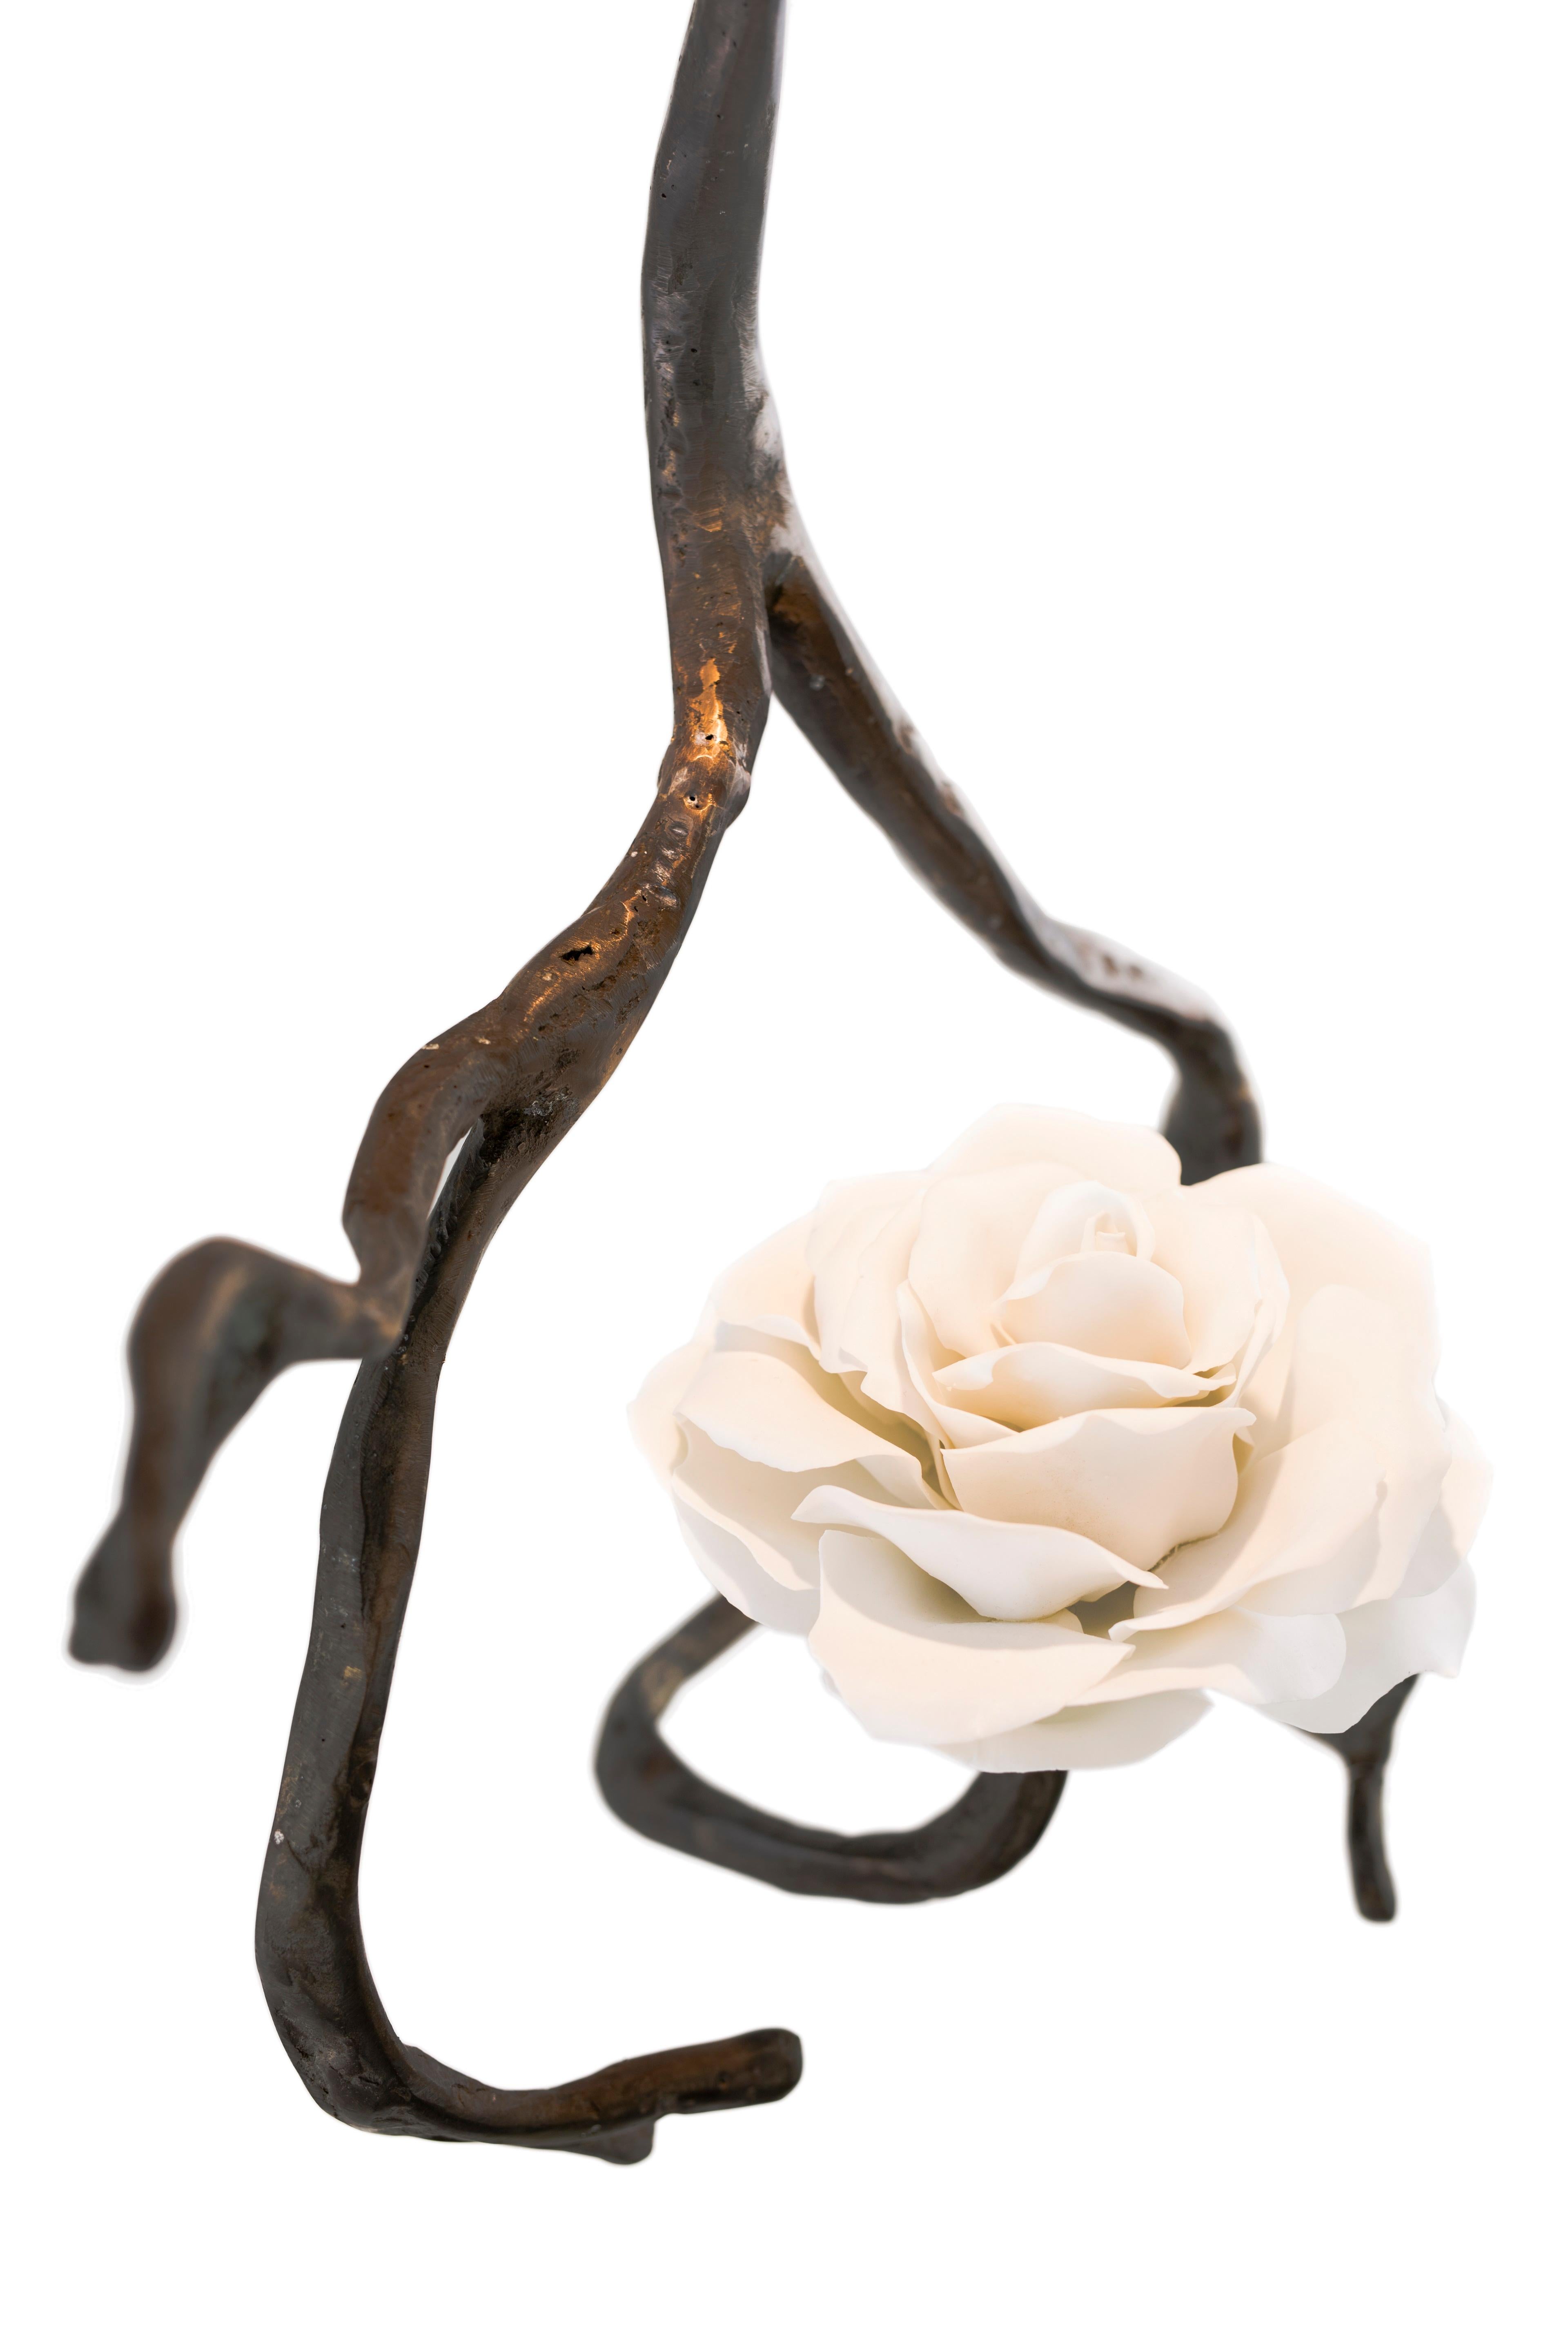 Orpheus Porcelain Rose Of Nymphenburg

The handcrafted porcelain rose is from Porzellan Manufaktur Nymphenburg, creating the finest porcelain in since 1747. 

Invited by Nymphenburg to create a new concept, William Brand sought to combine